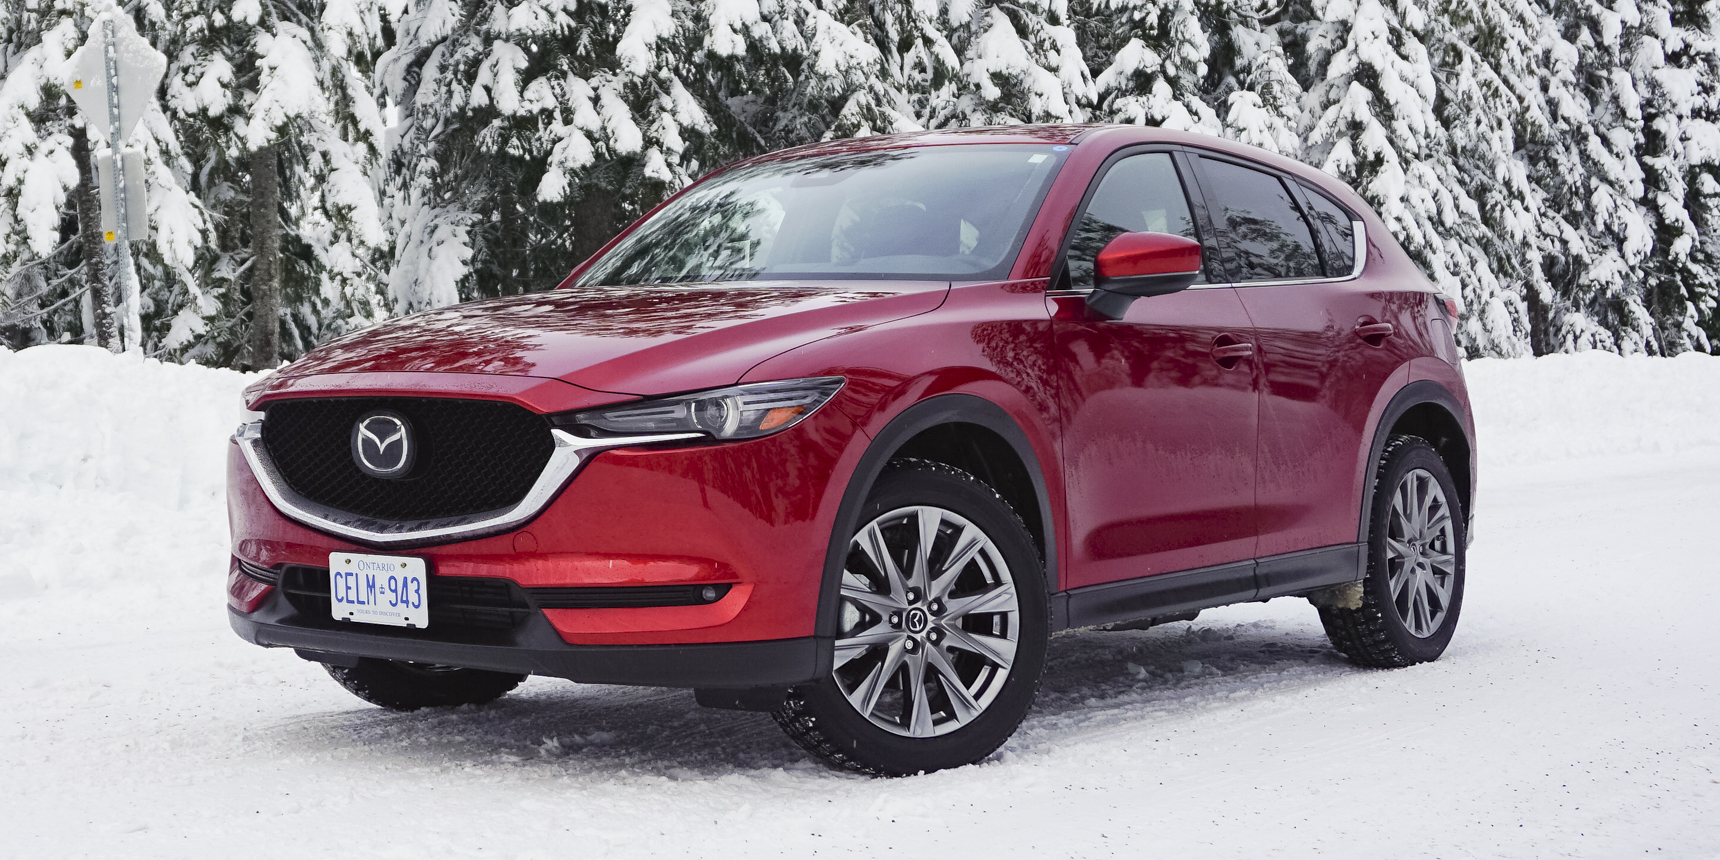 2019 Mazda CX-5 First Drive Review: A Turbo-Powered Turn Towards Premium